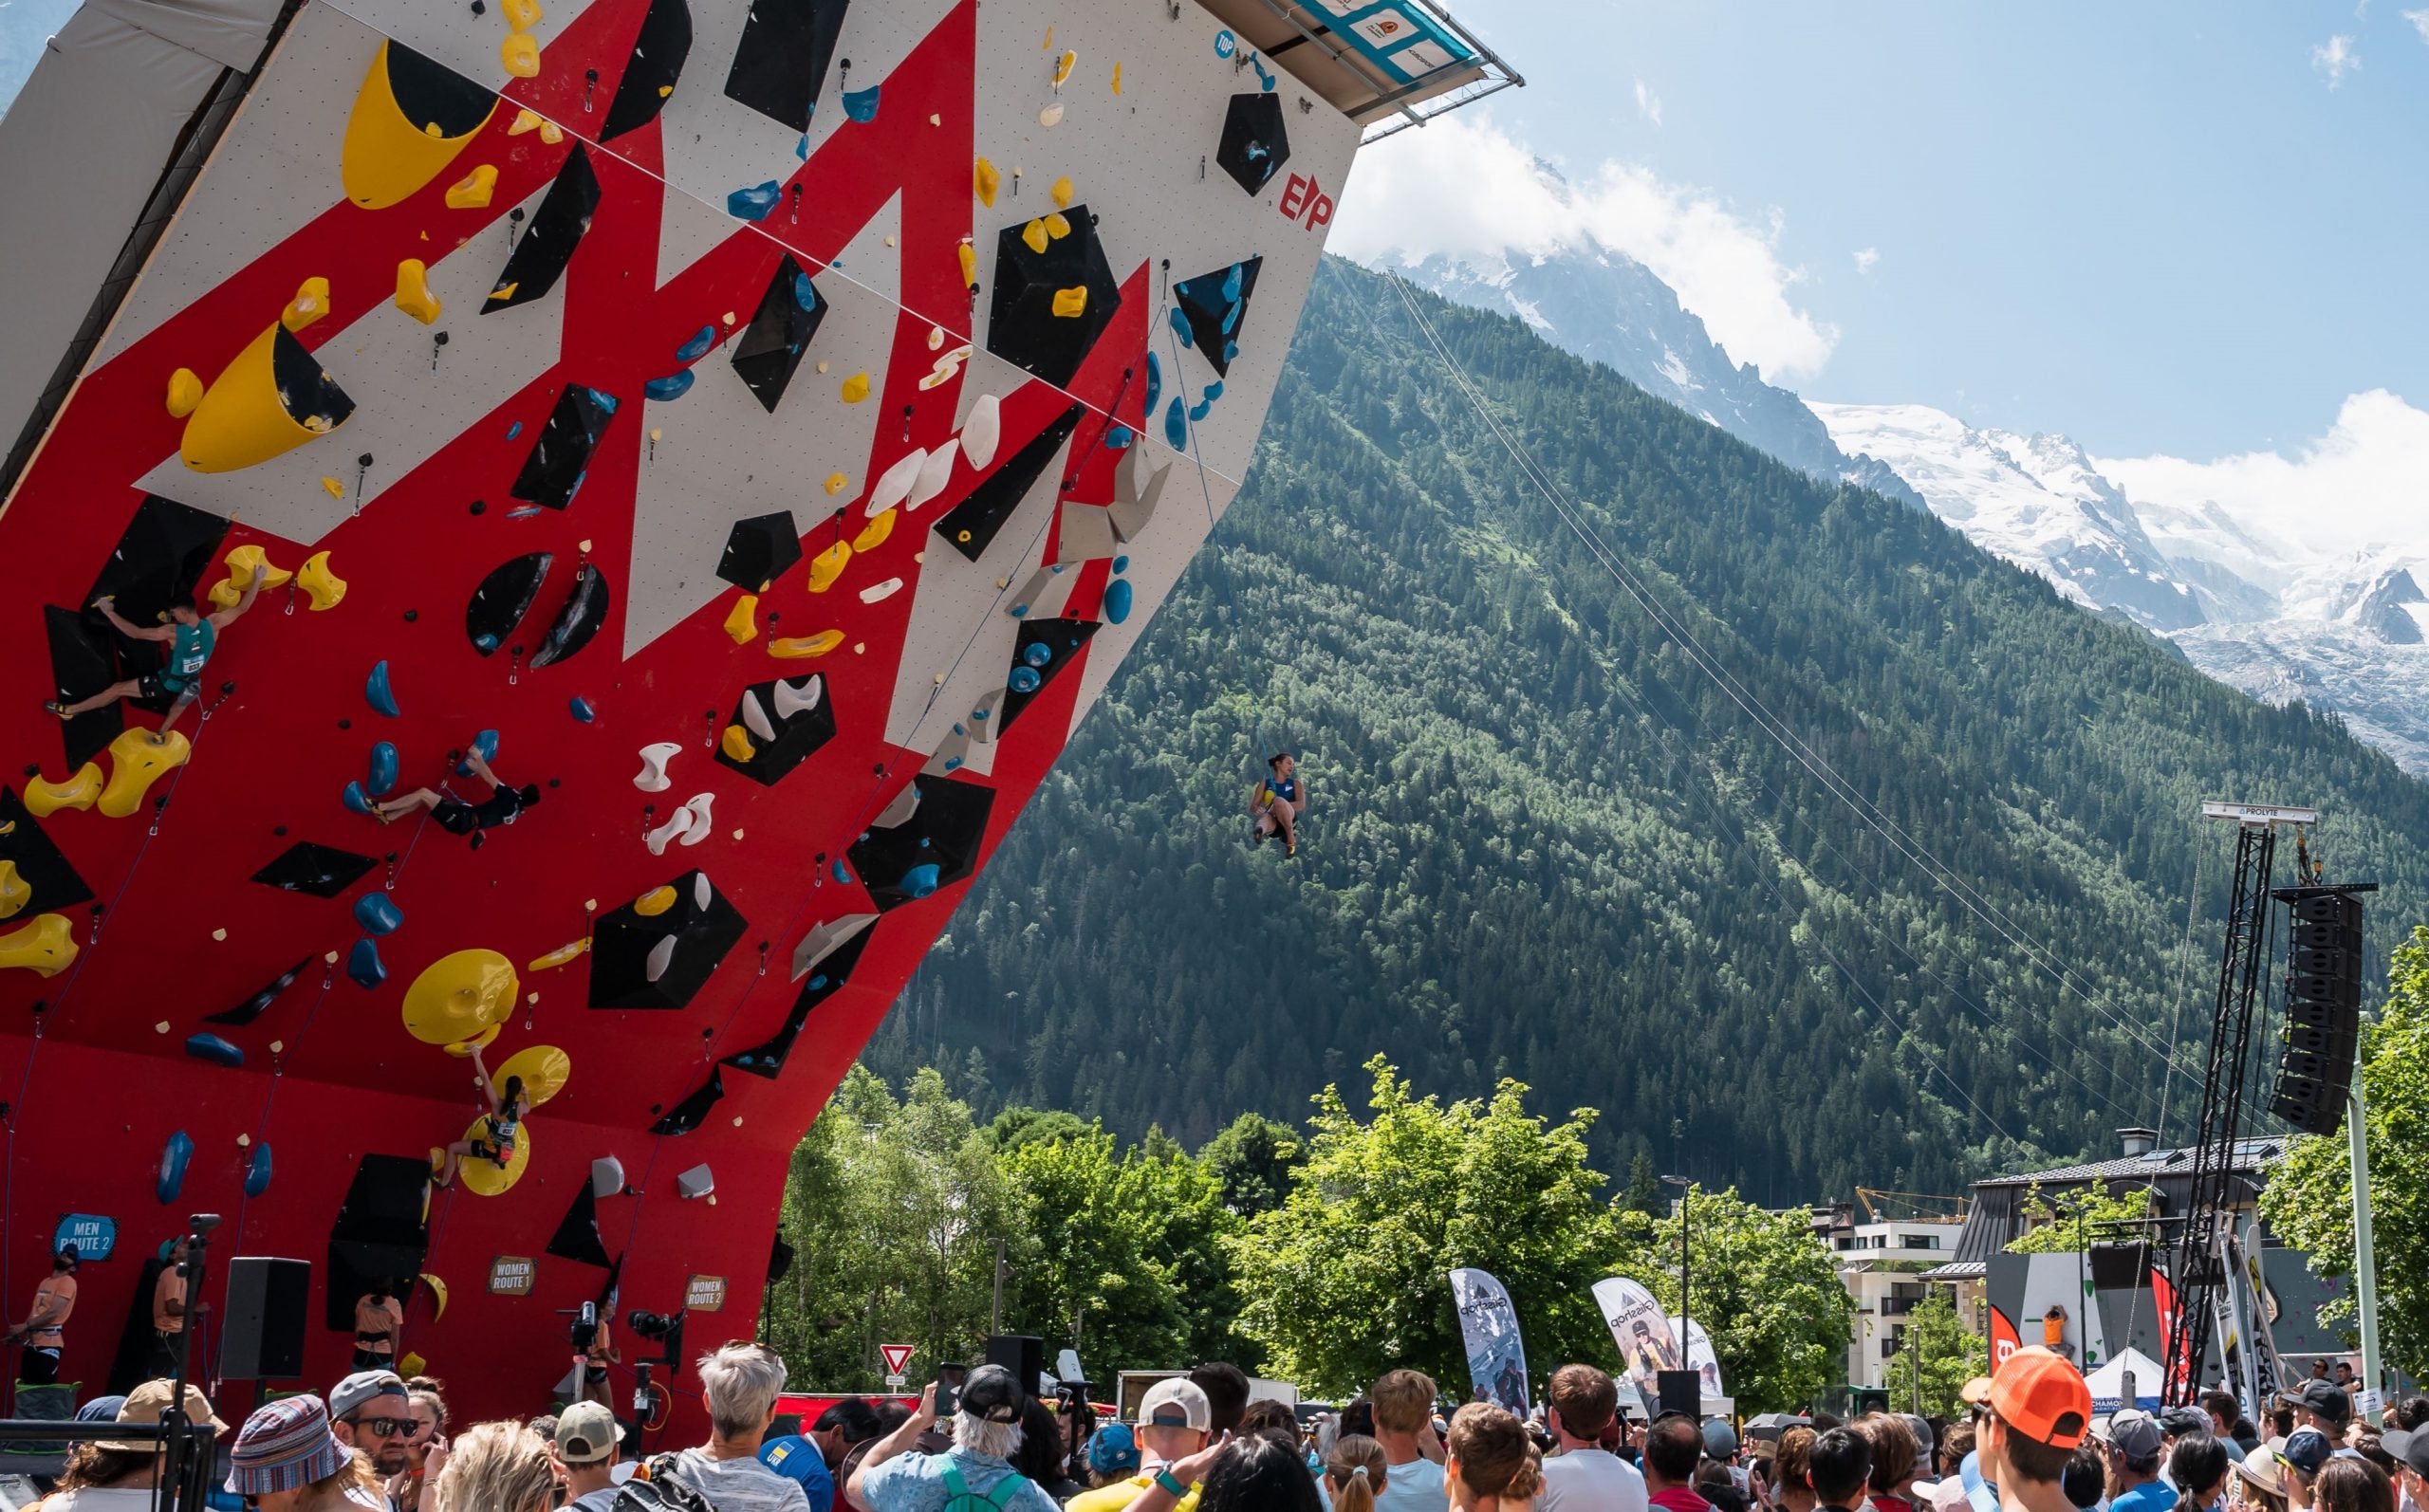 Attend the Climbing World Cup